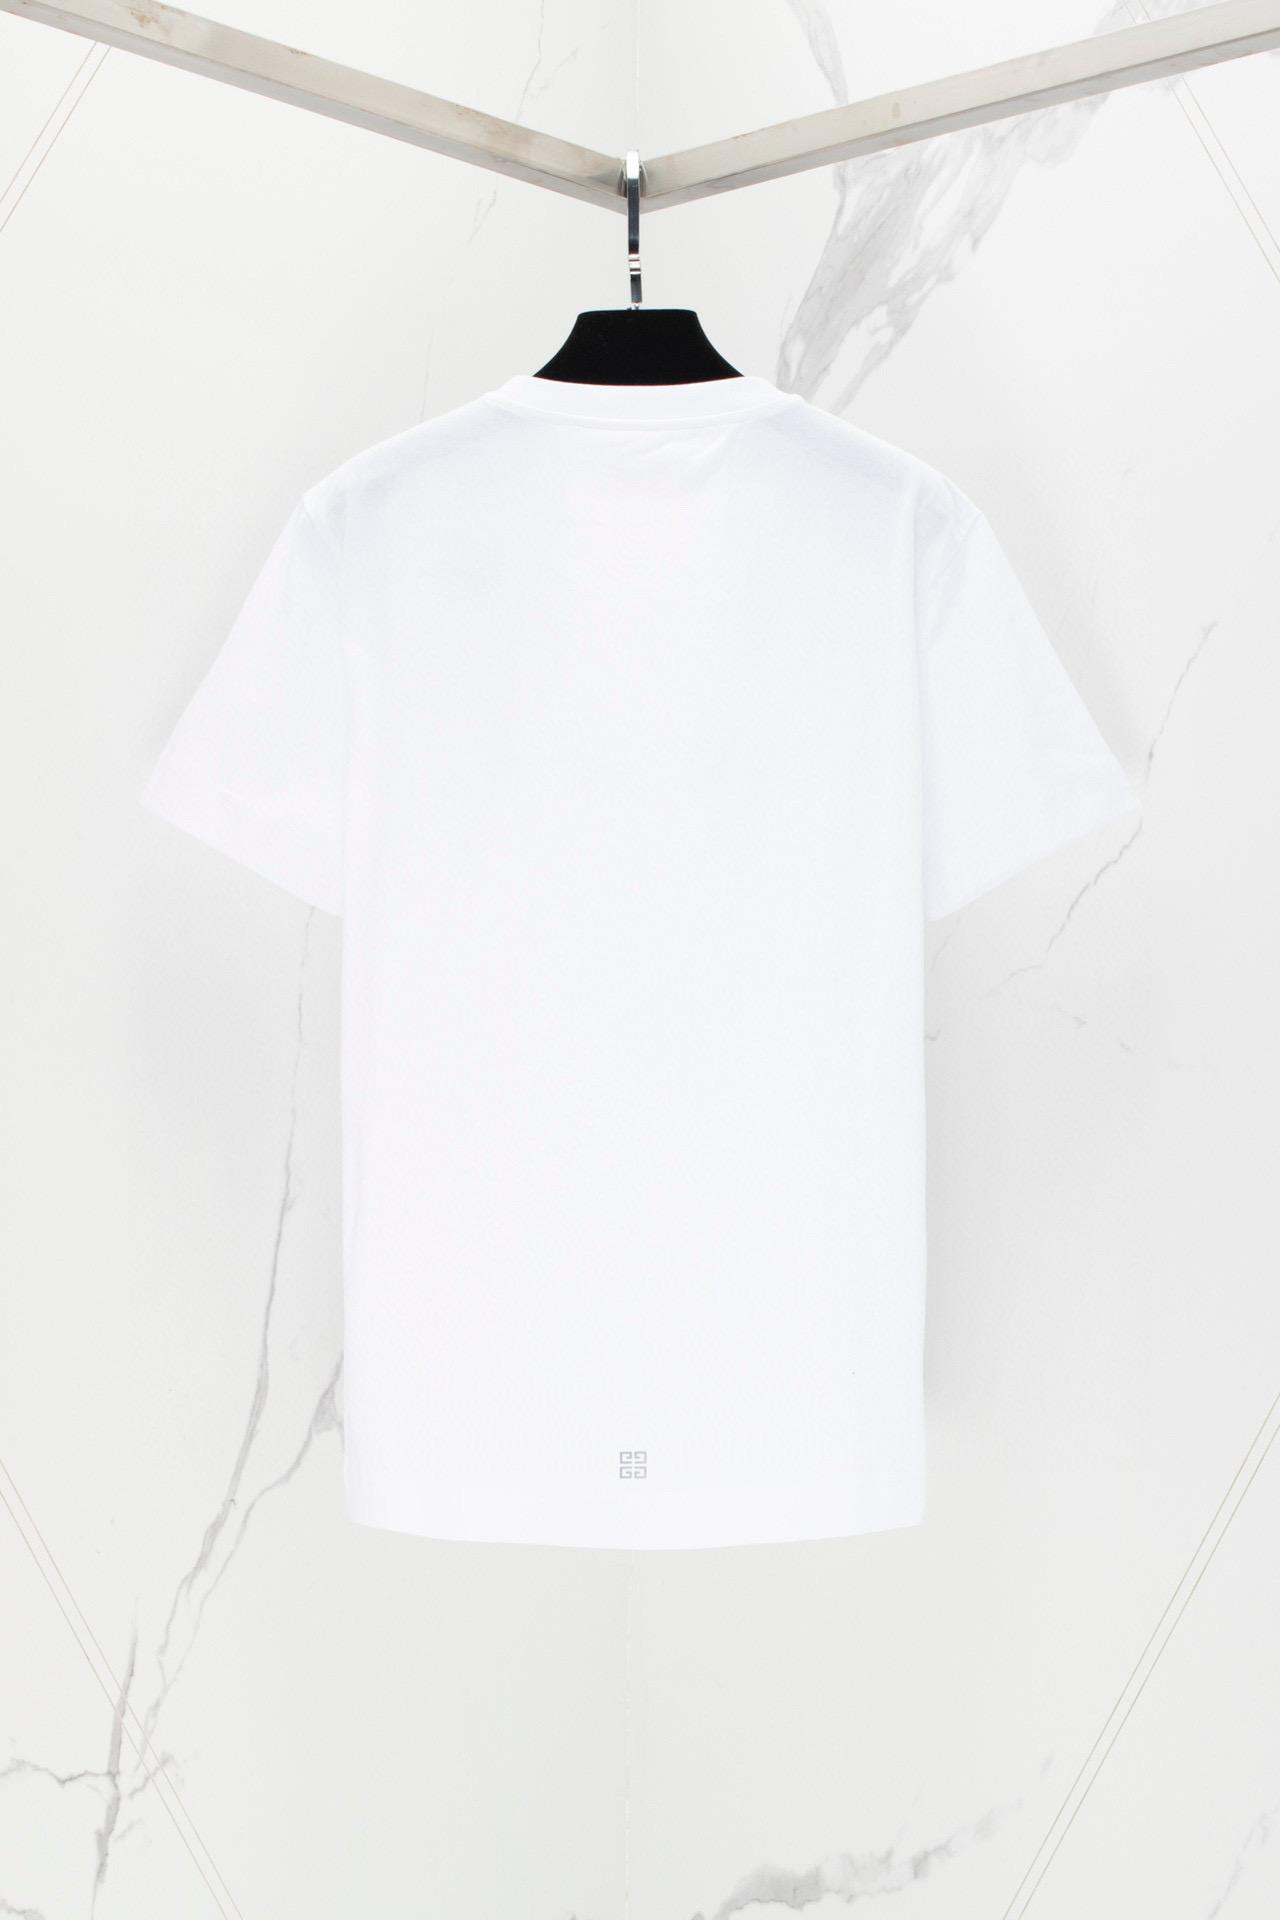 reflective-givenchy-slim-fit-t-shirt-in-cotton-6834_16845015983-1000